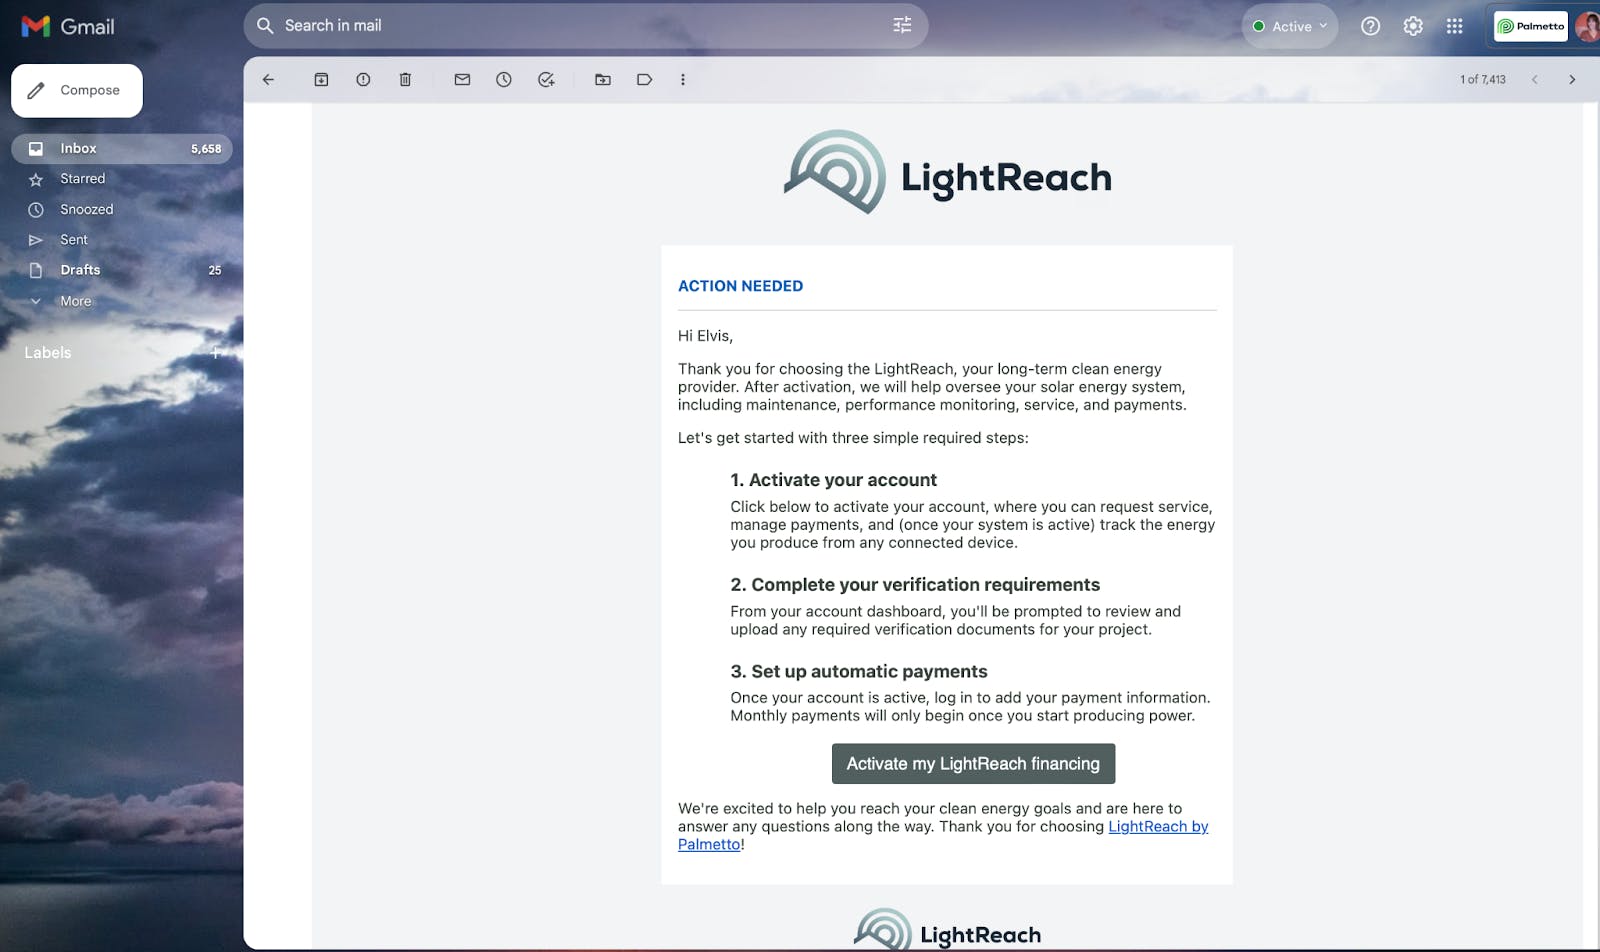 Screenshot of the invite email that is received to activate your LightReach account.